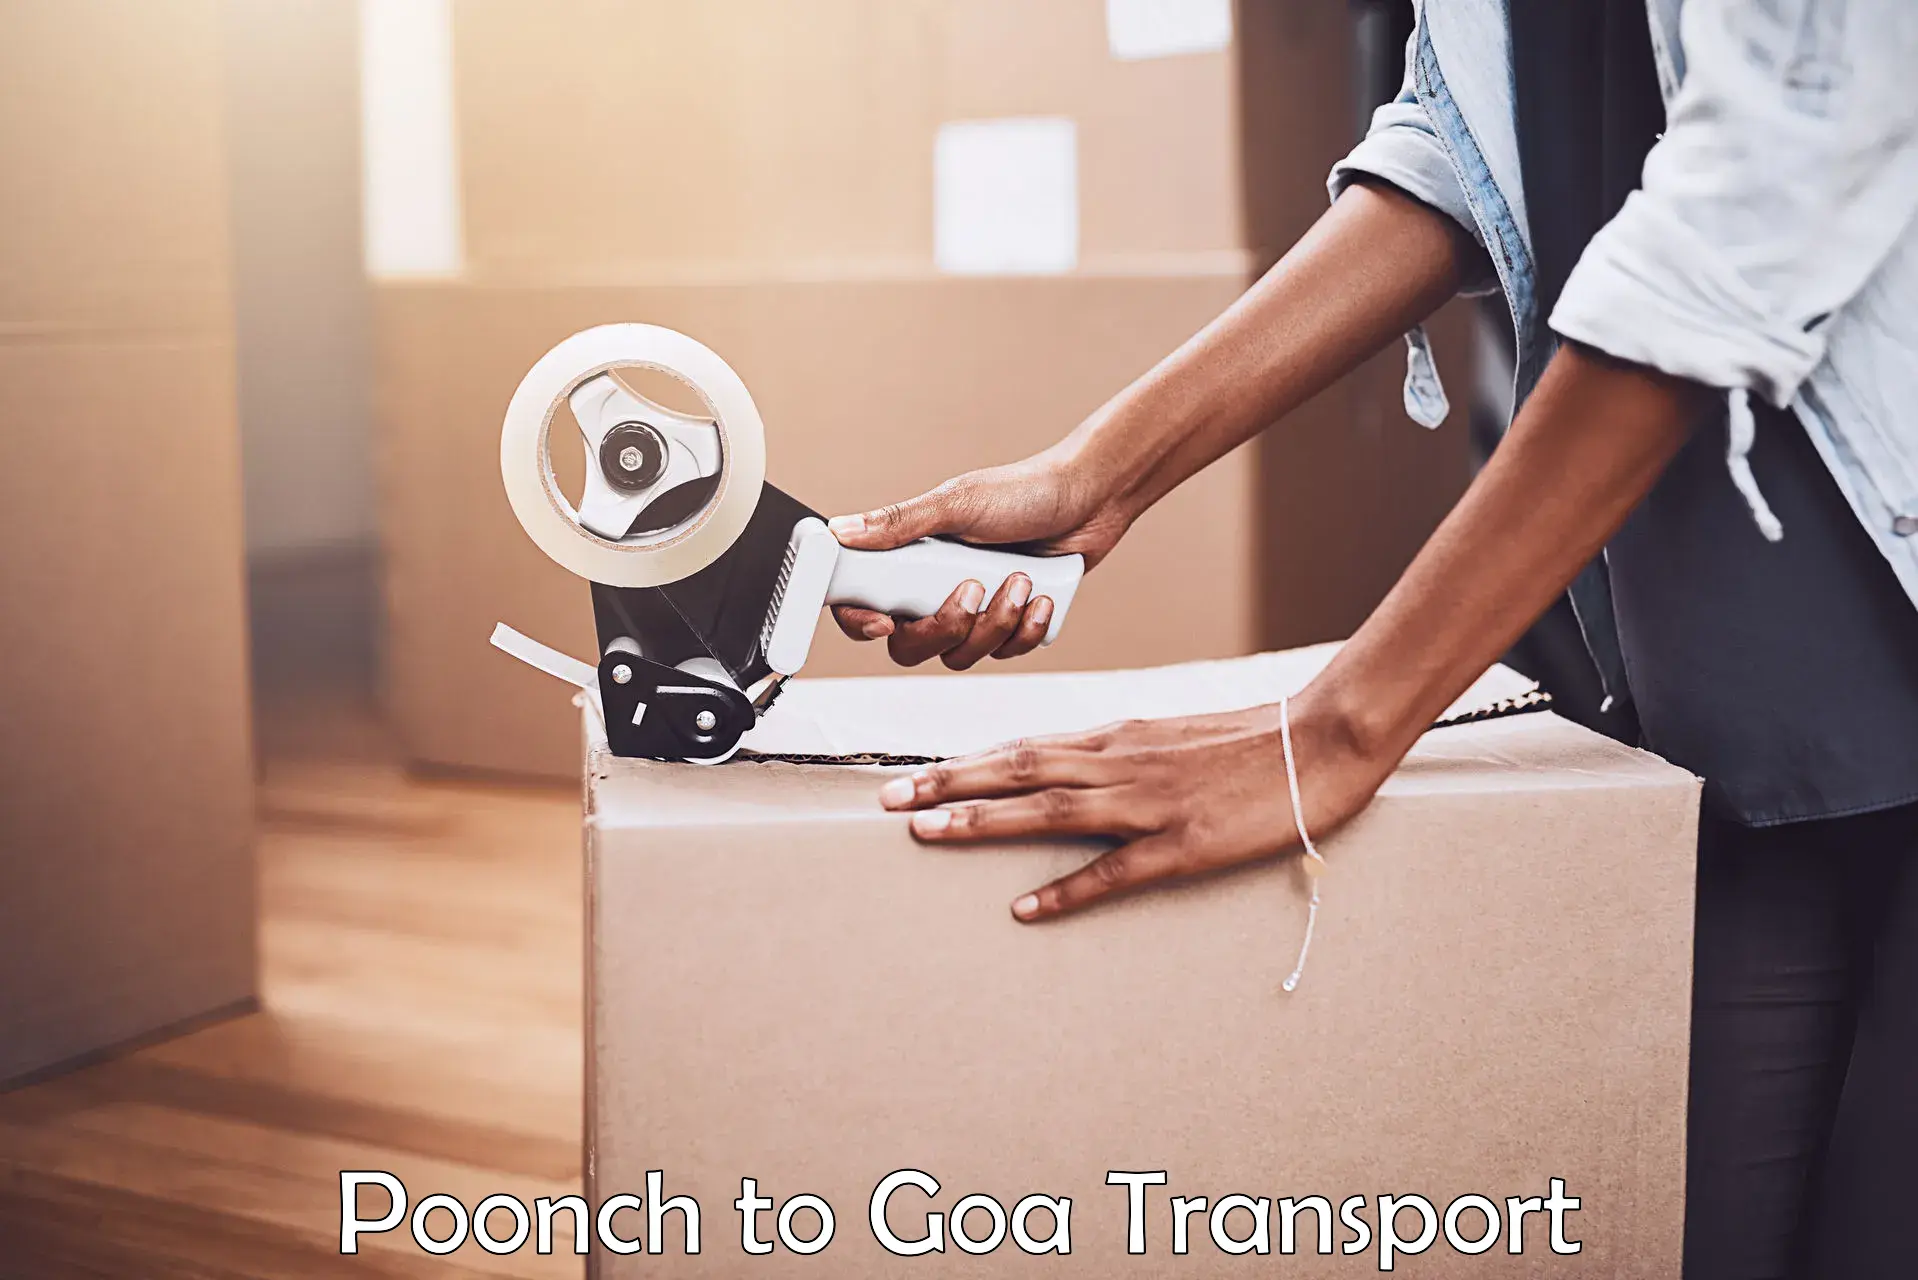 Online transport service Poonch to South Goa